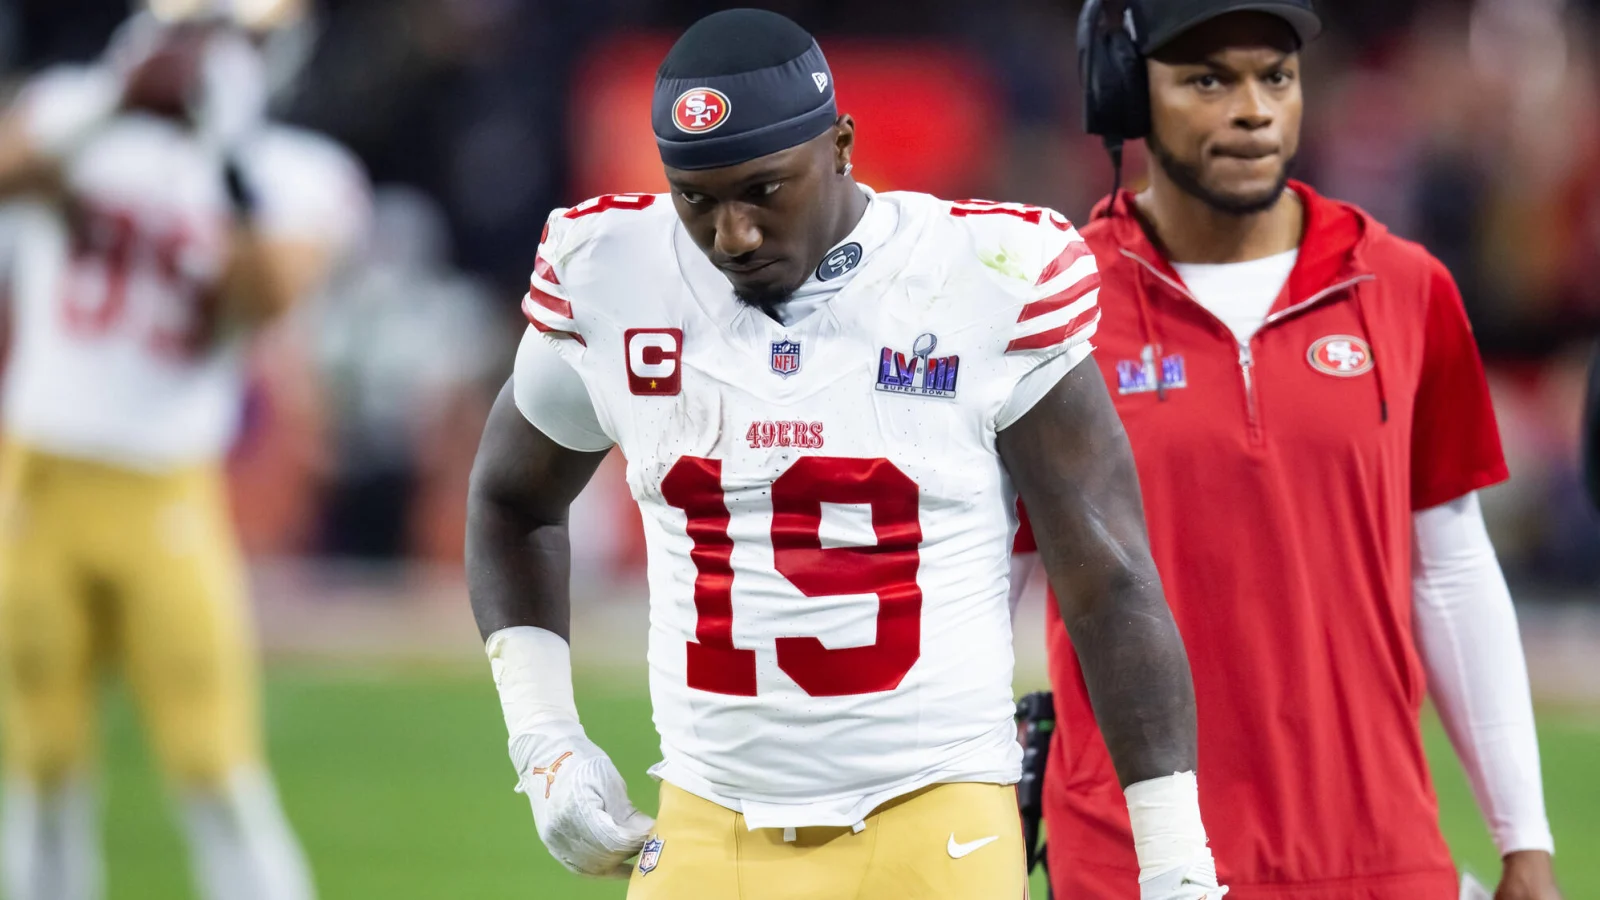 NFL News: San Francisco 49ers Facing Nightmare 2-Way Battle at Wide Receiver